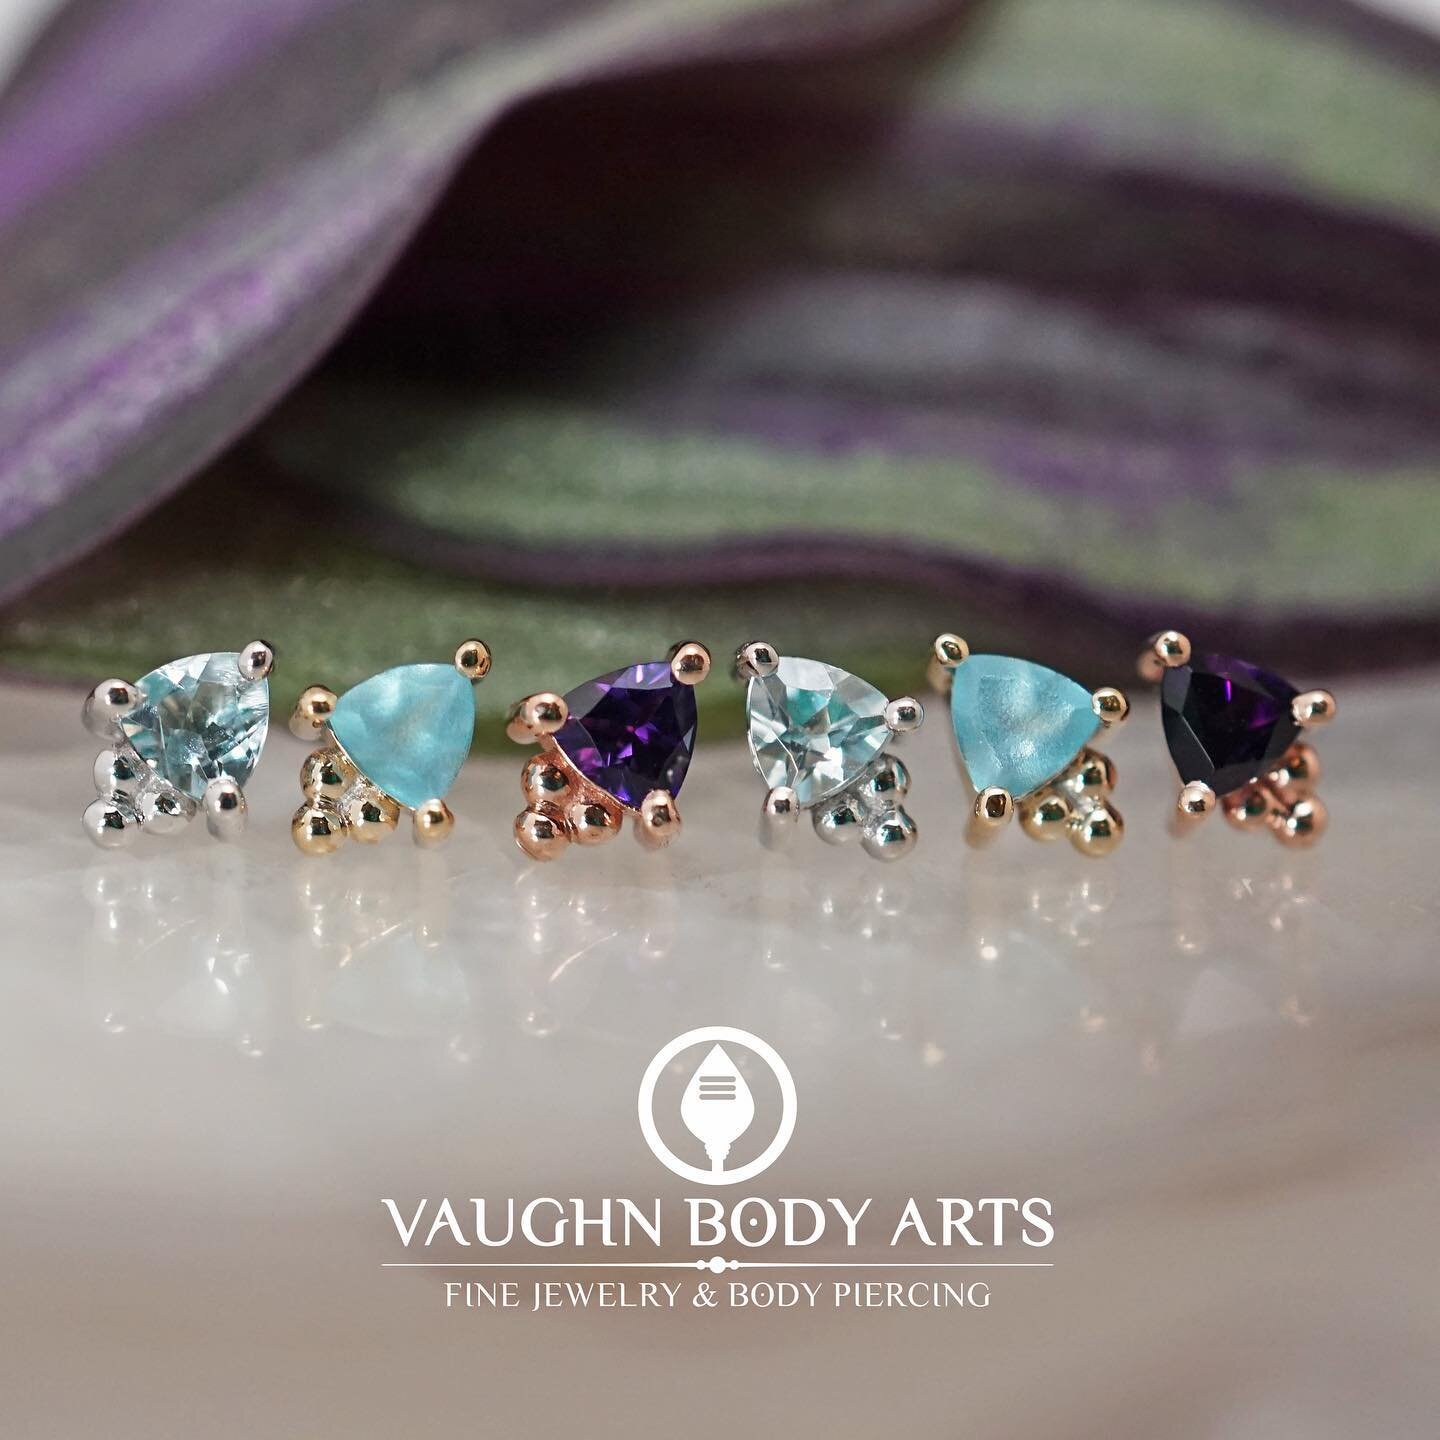 Here are some lovely new BVLA pieces that just arrived at the studio! 

These &ldquo;Timka&rdquo; threadless ends have a 3mm trillion cut gemstone with a cute little tri-bead accent. 

Pictured here we have them in White Gold with genuine Aquamarine,